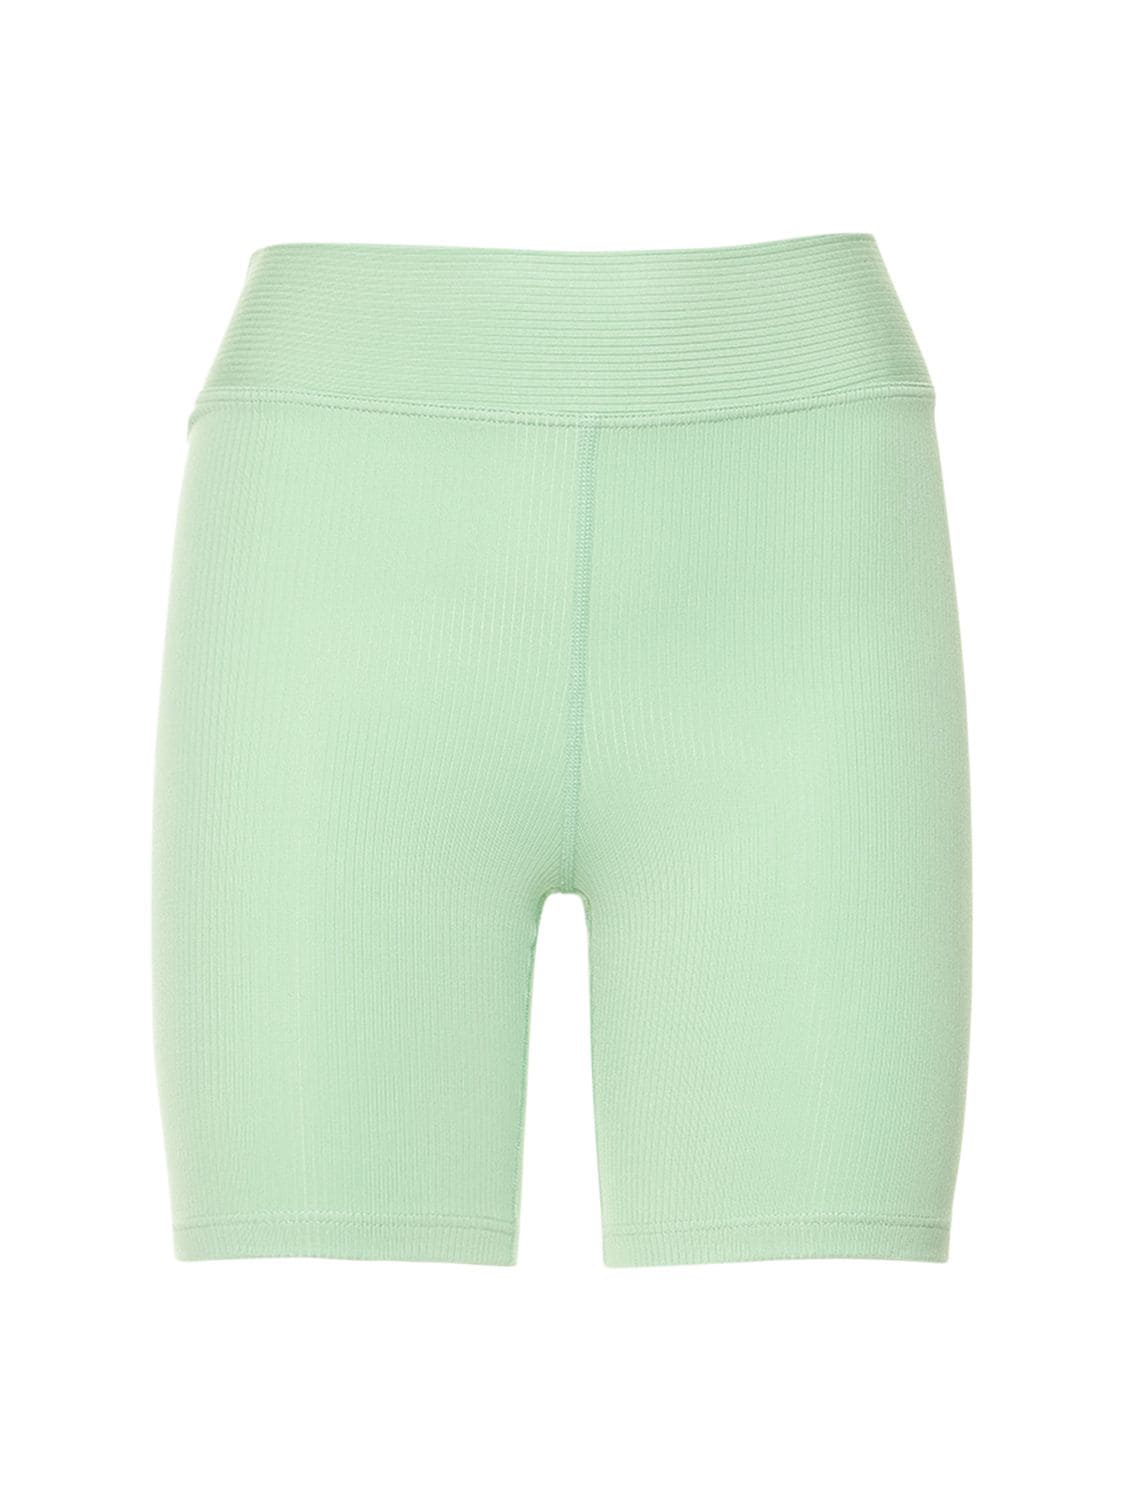 THE UPSIDE SOLSTICE MID RISE SPIN SHORTS